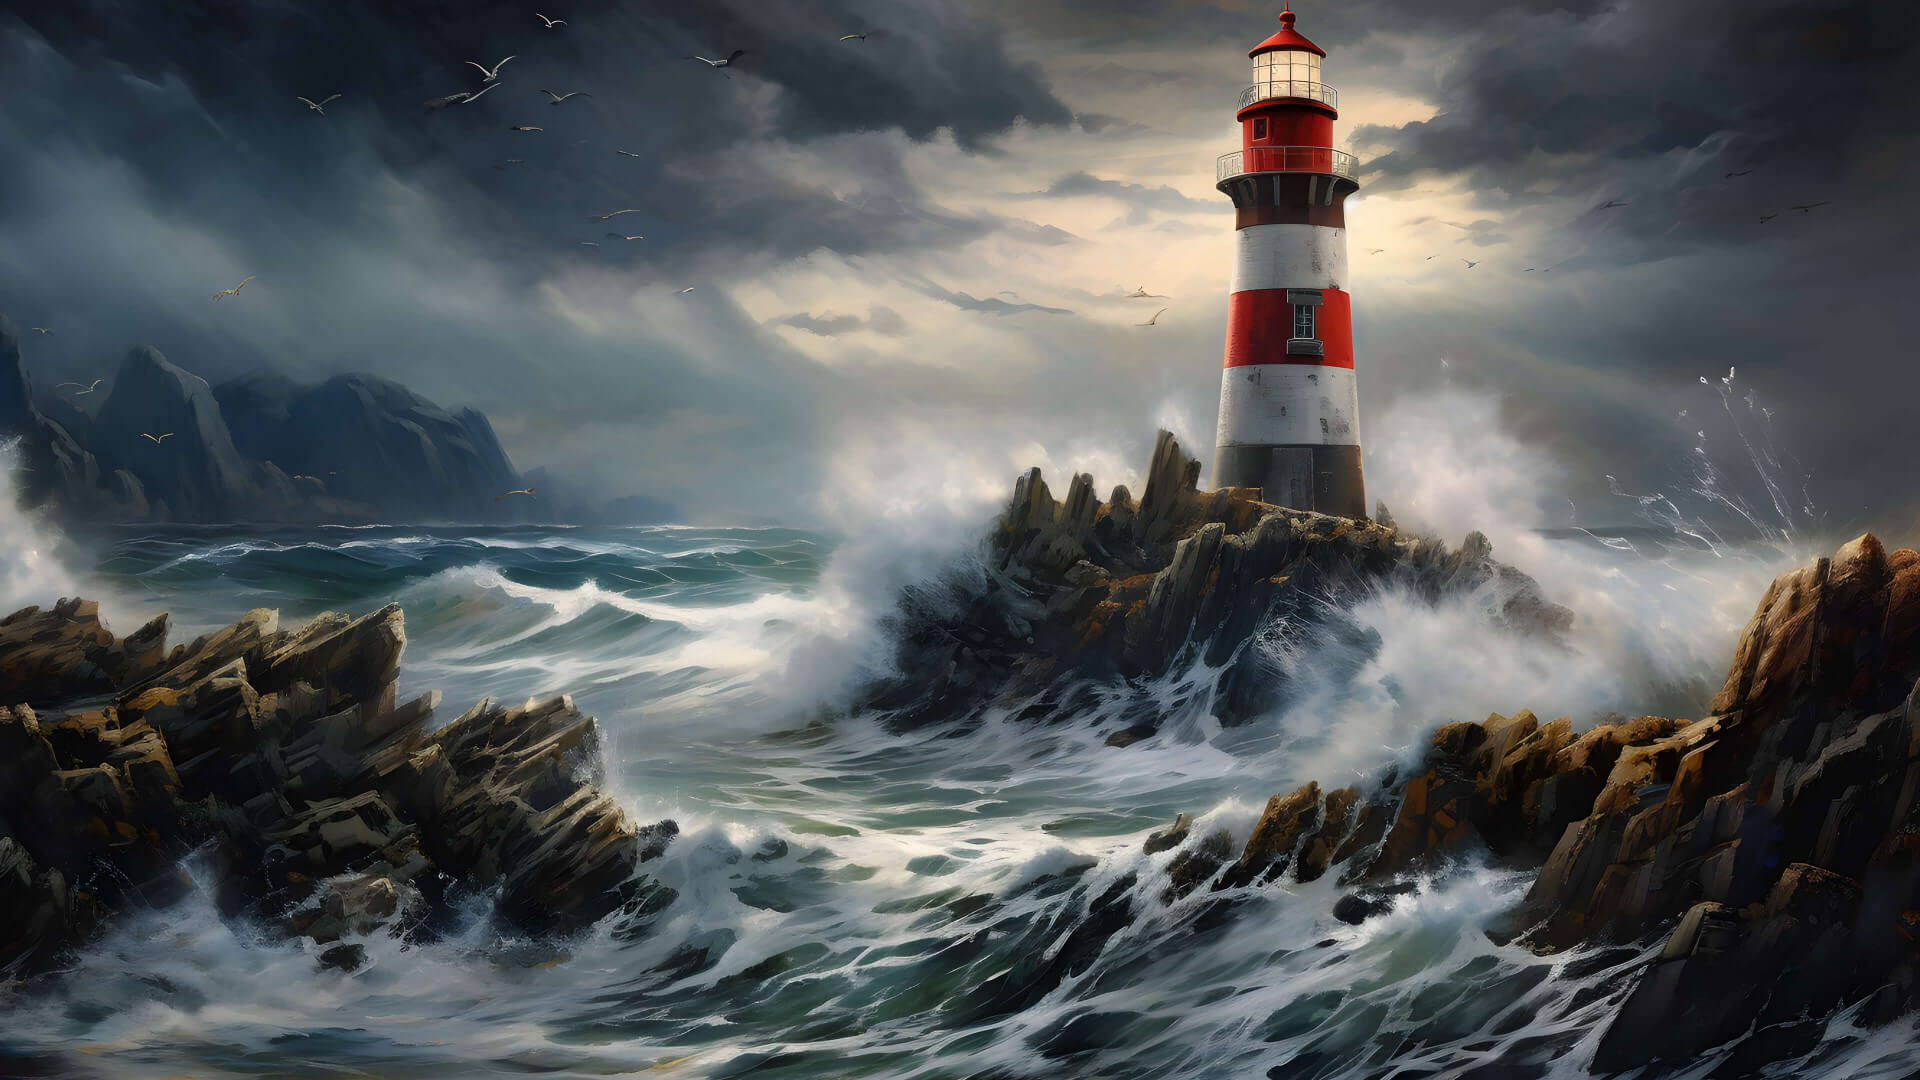 Lighthouse in the ocean waves wallpaper 1600x900